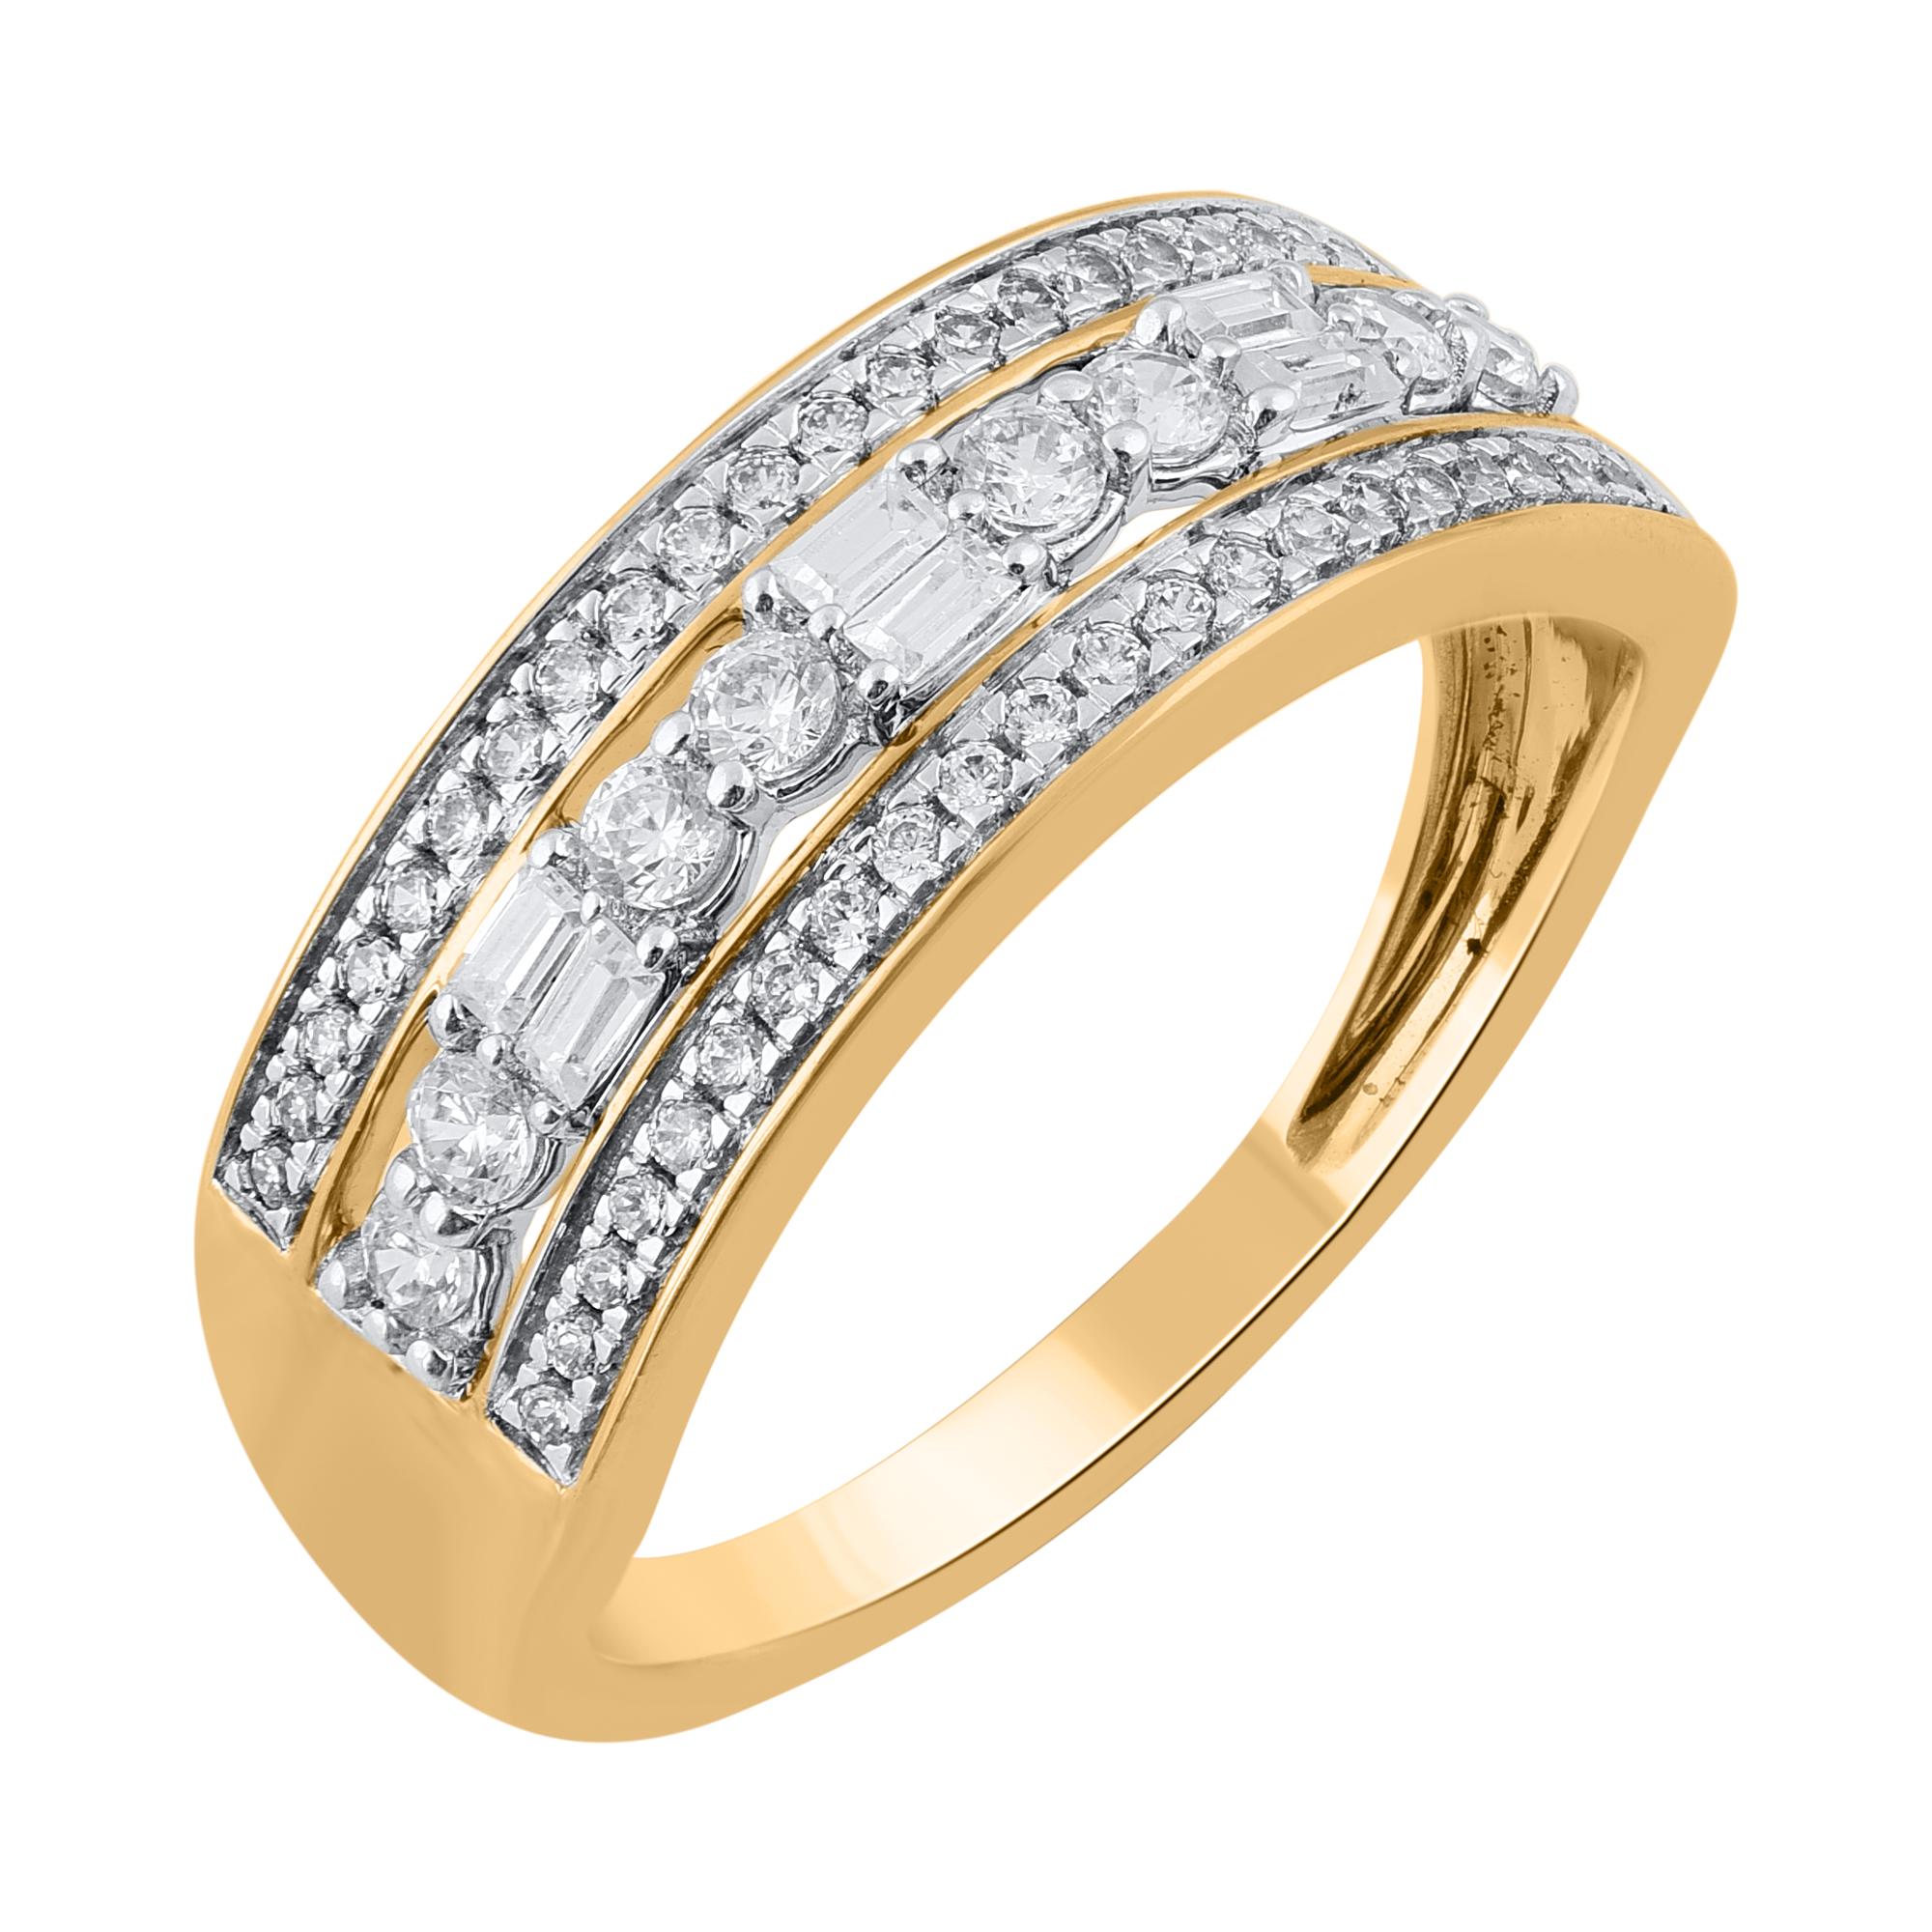 Dazzling and classic, this diamond band ring is anything but ordinary. These band ring are studded with 56 brilliant Cut, single Cut & baguette natural diamonds in 18KT yellow gold in pave and prong setting . The white diamonds are graded as H-I